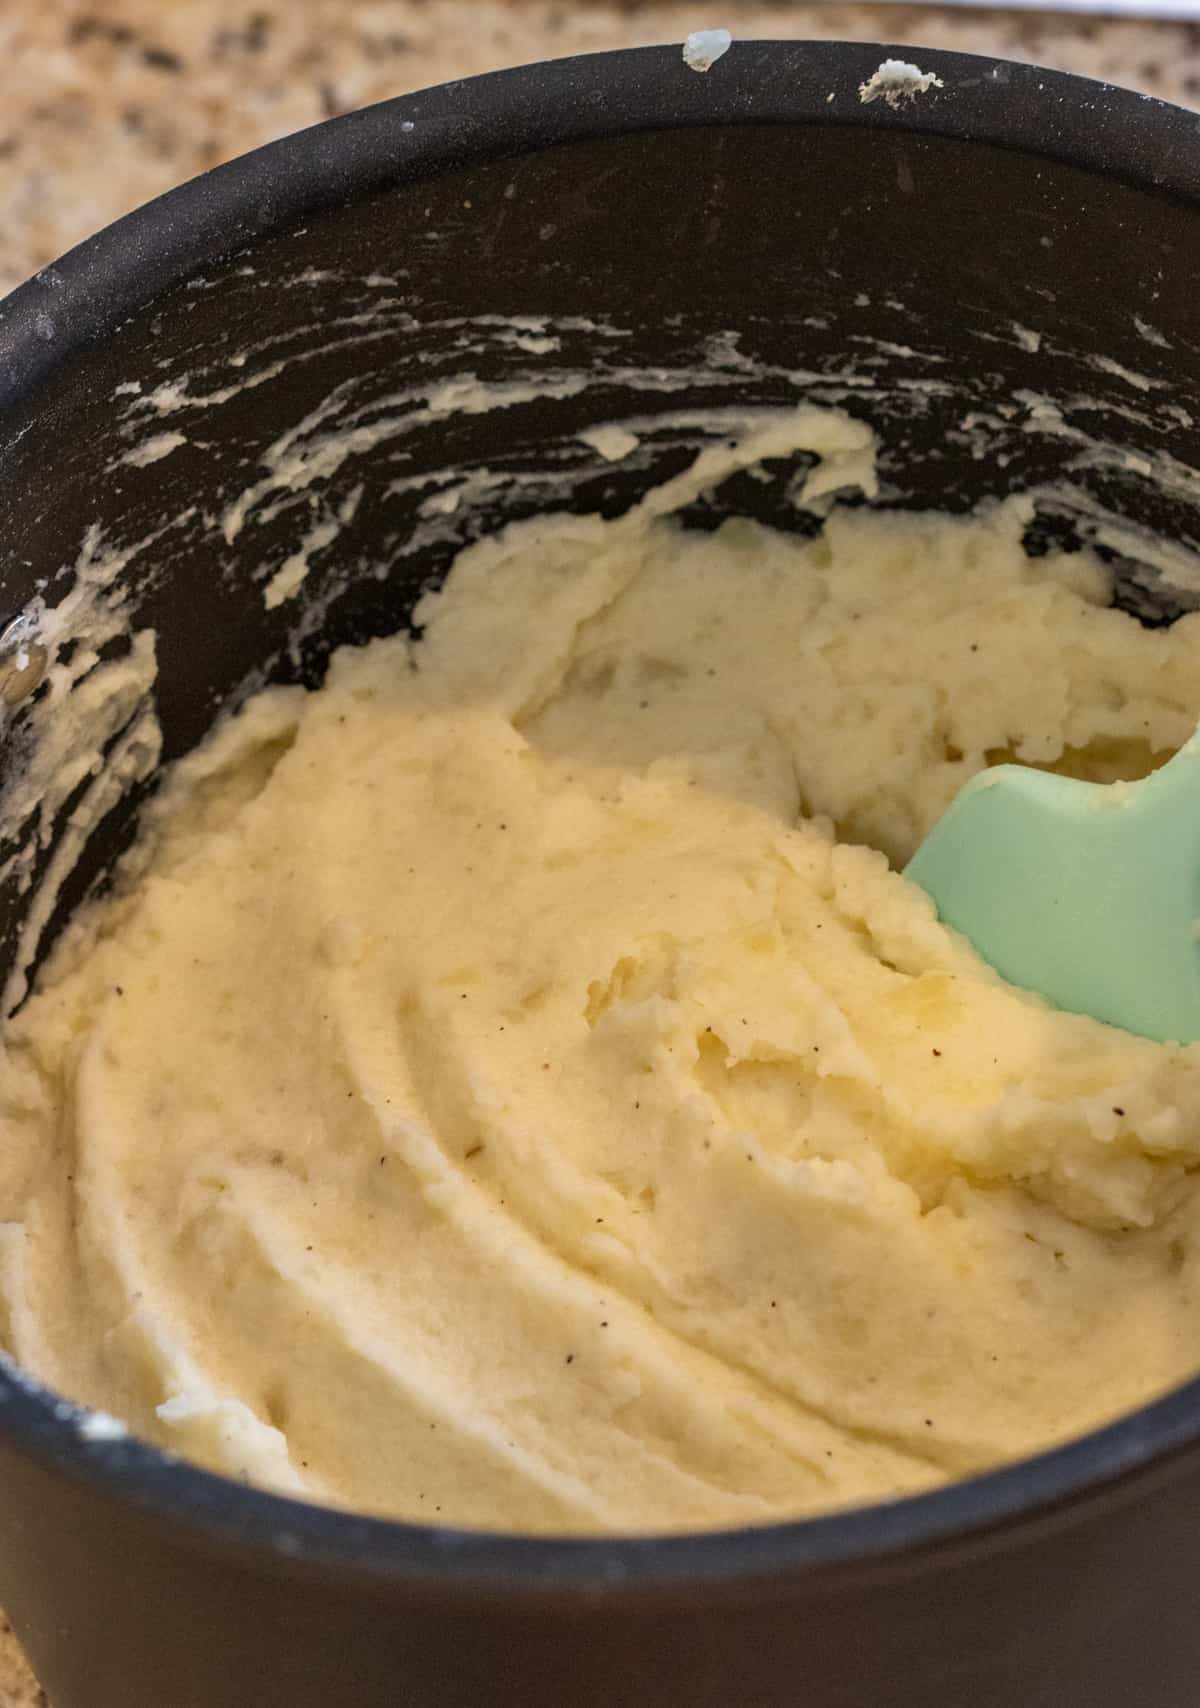 Mashed potatoes in a pot with a blue rubber spatula.